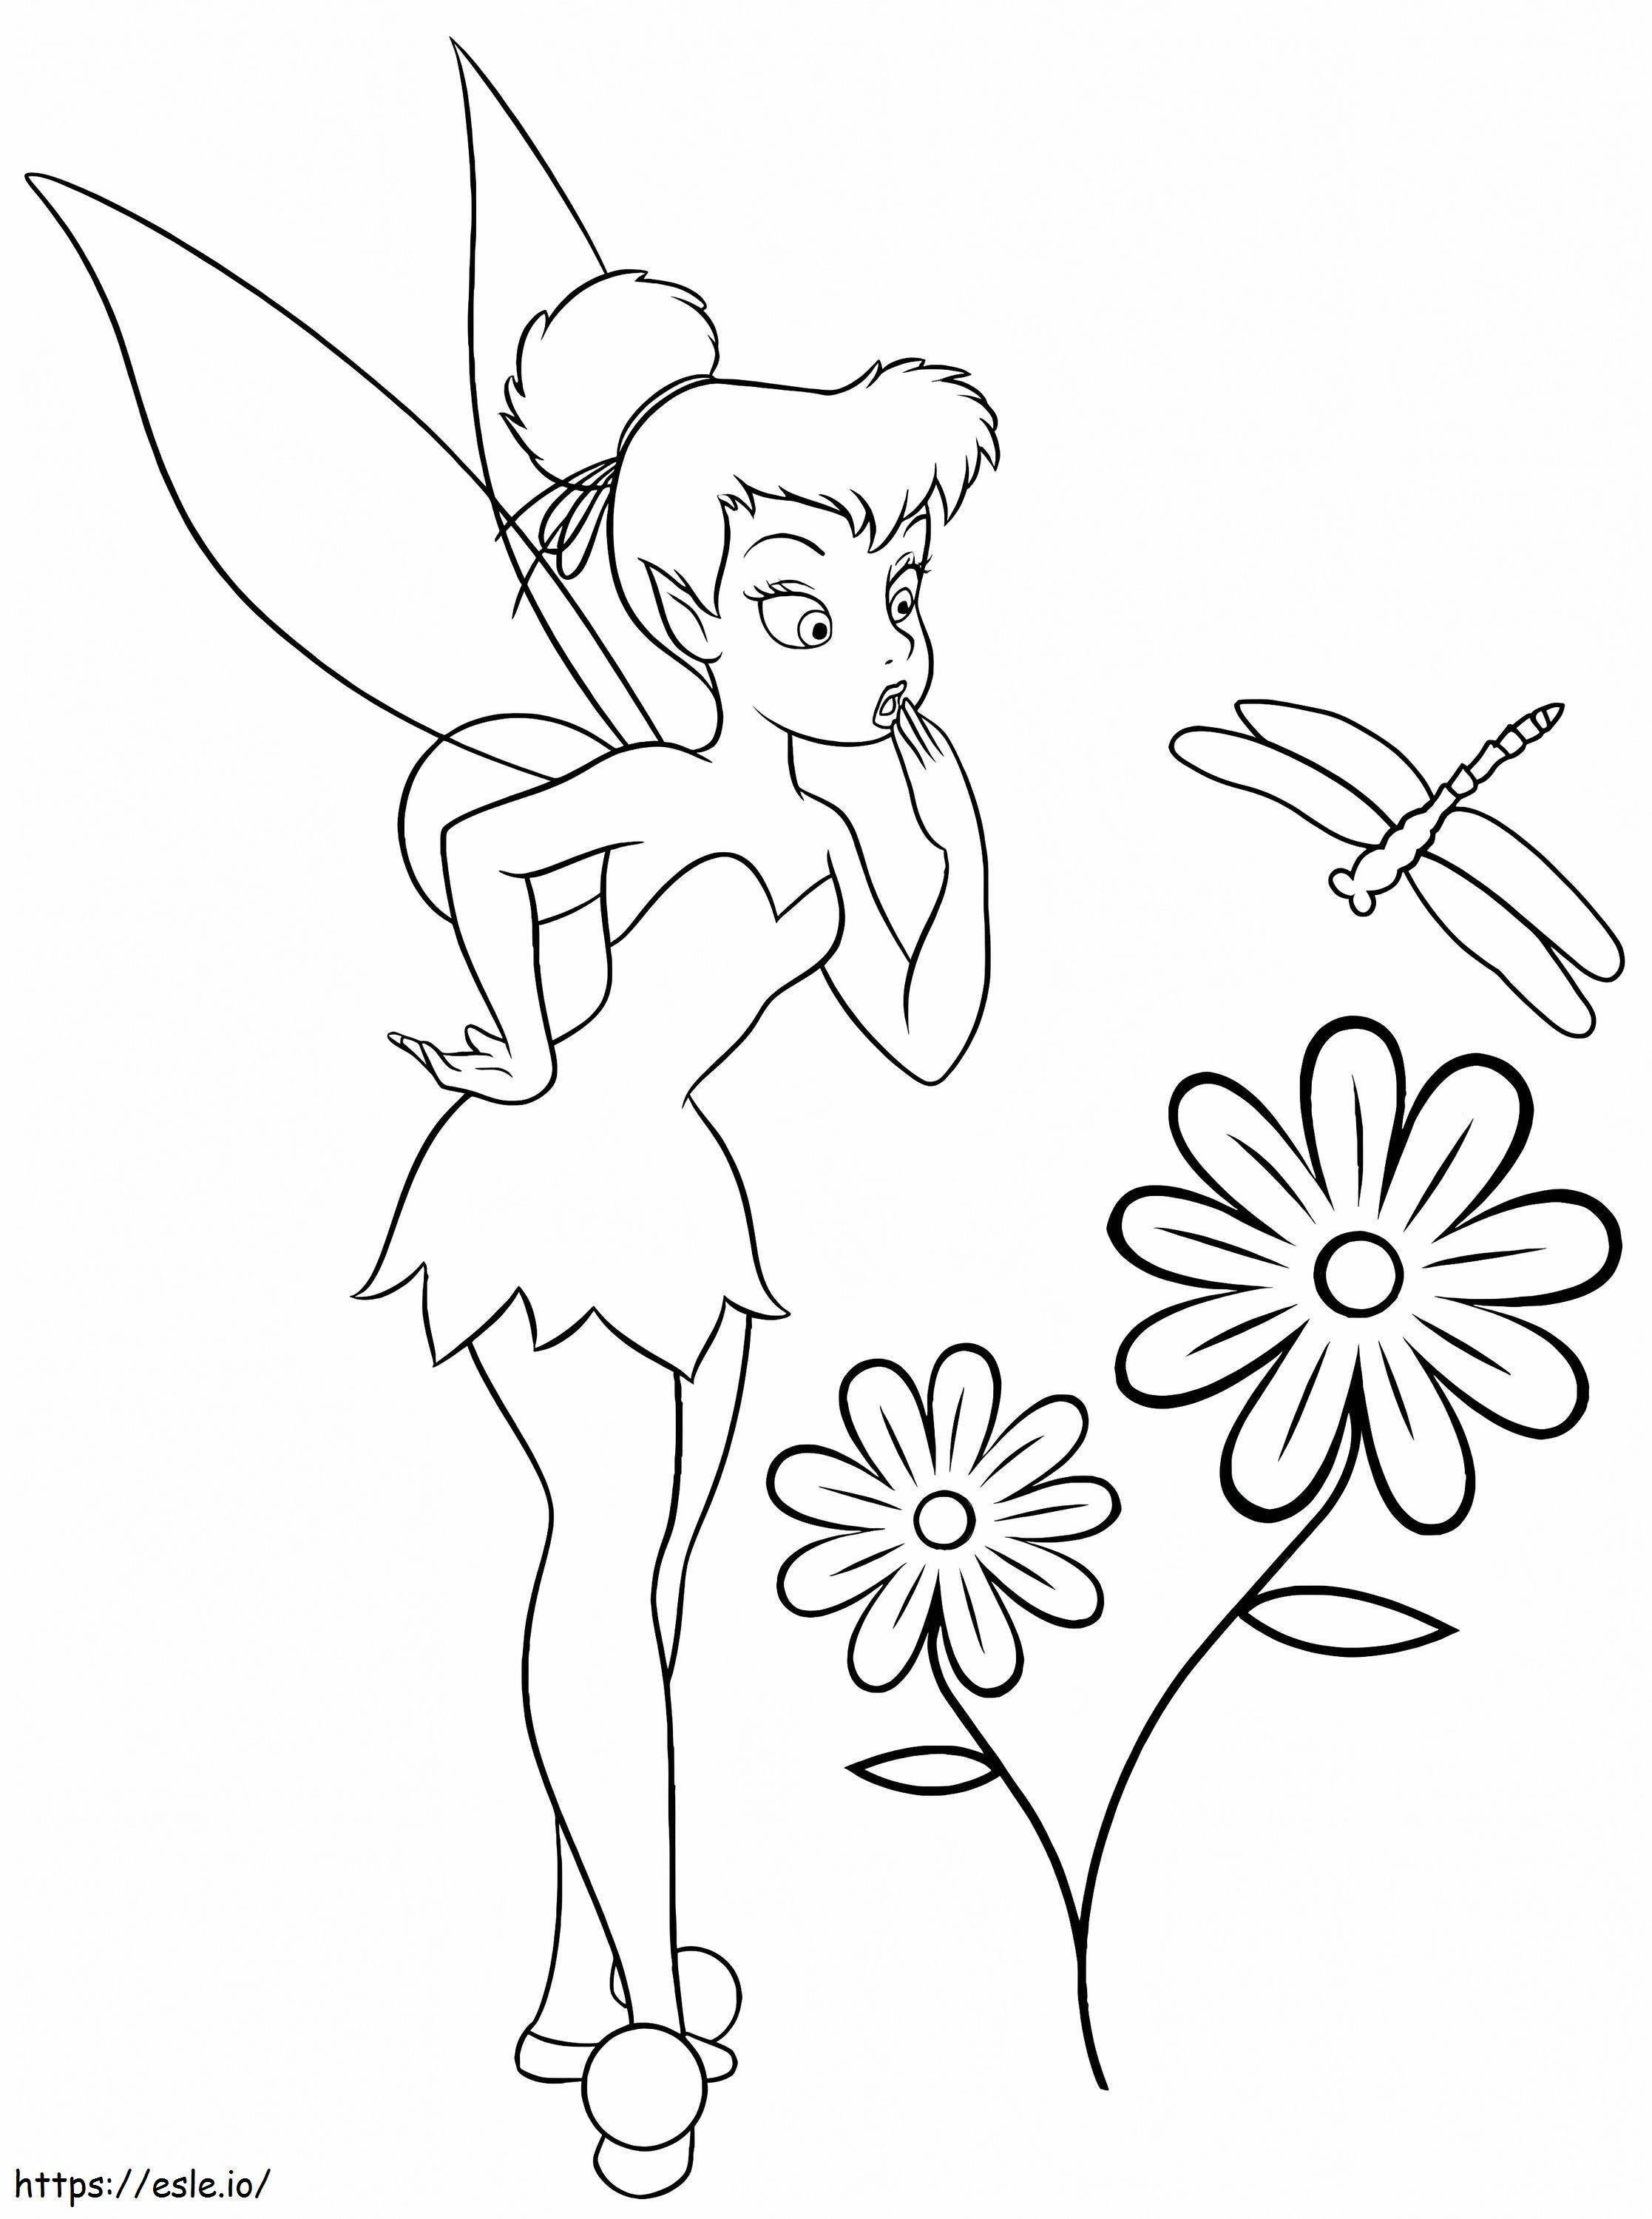 1582339044 Tinkerbell With Flowers coloring page